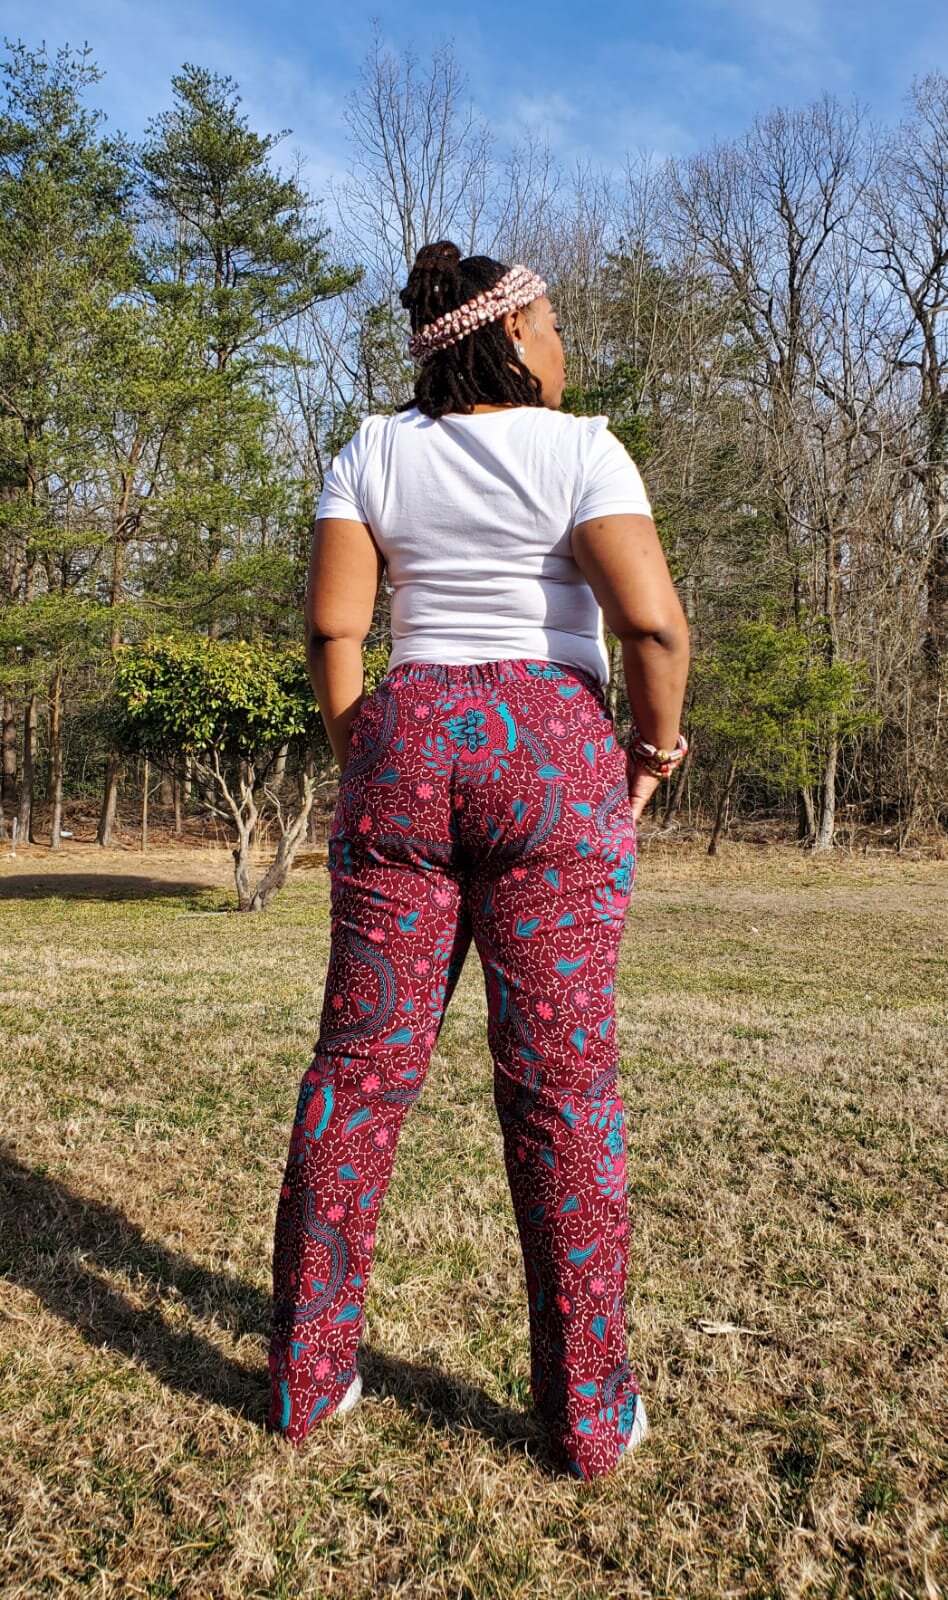 Jenny Red African Print Pants Set For Women